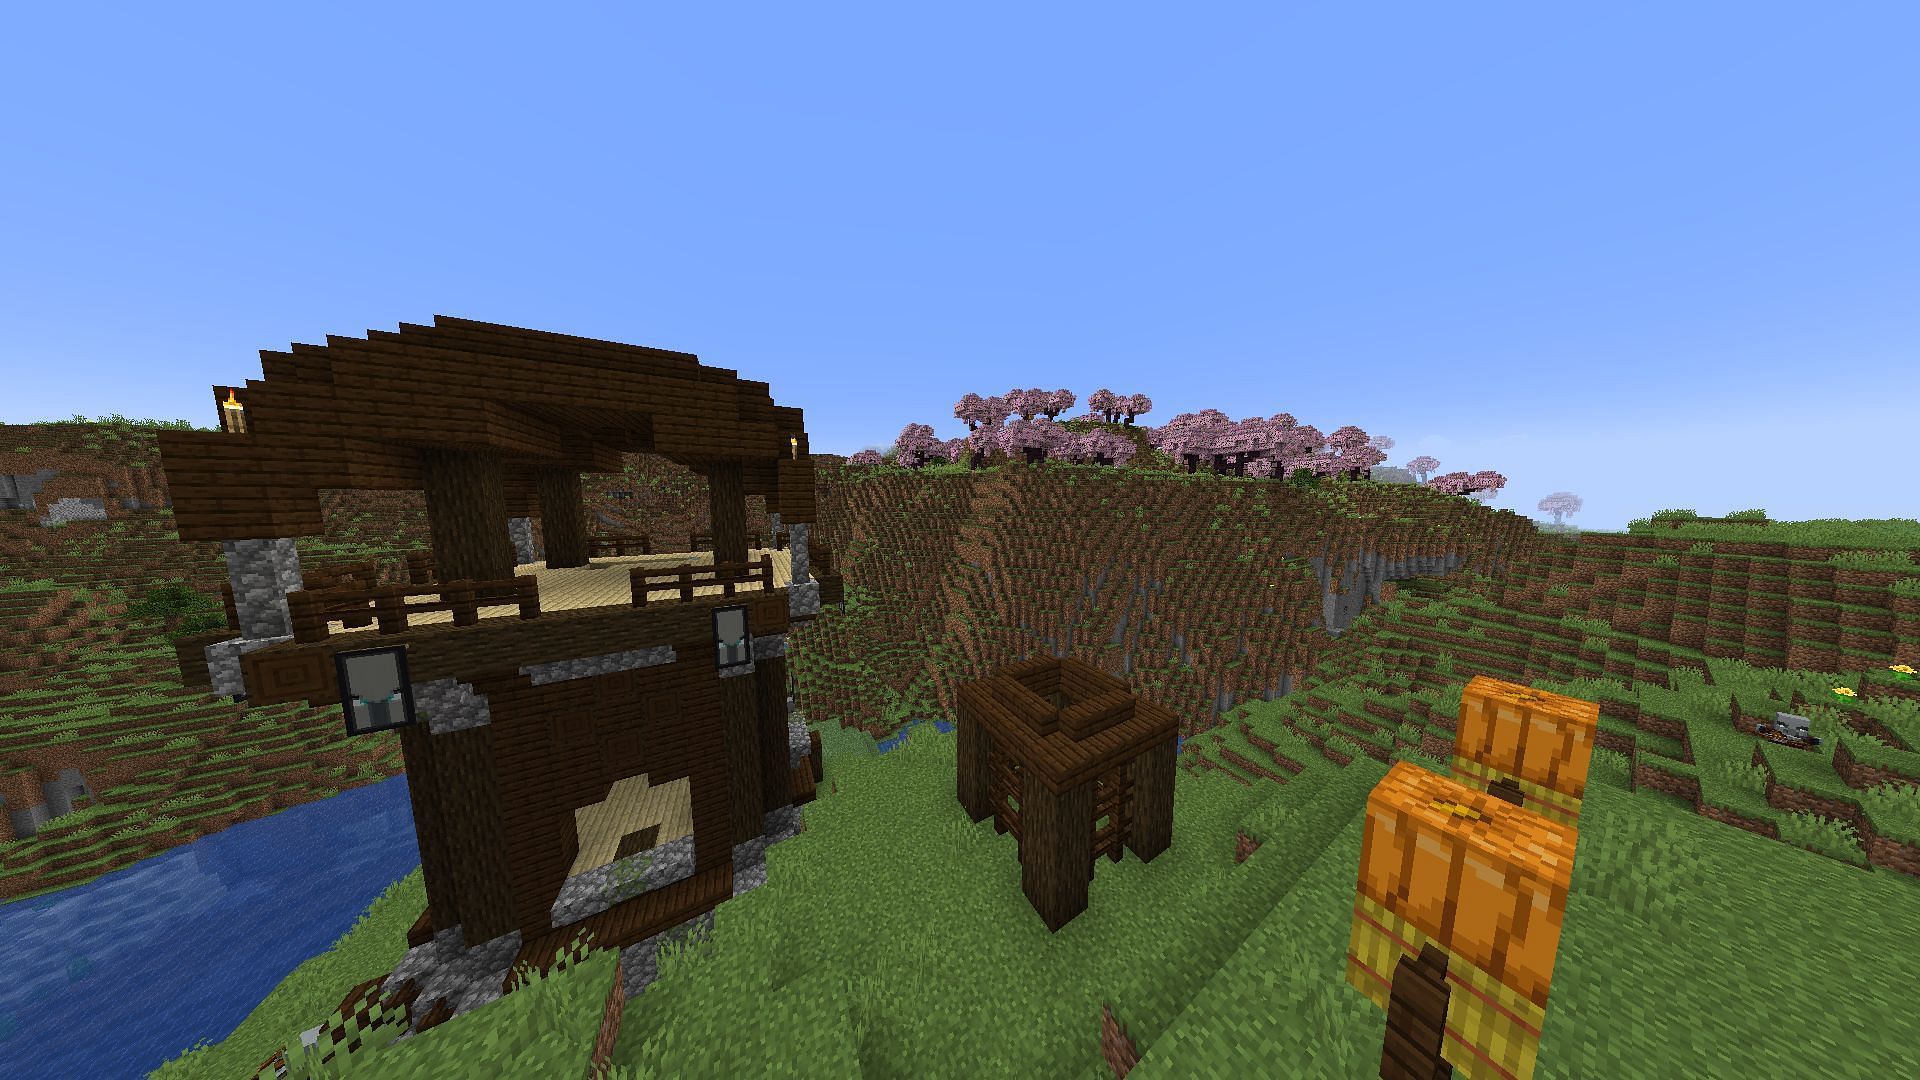 Pillager Outpost and Cherry Blossom biome at spawn (Image via Mojang)